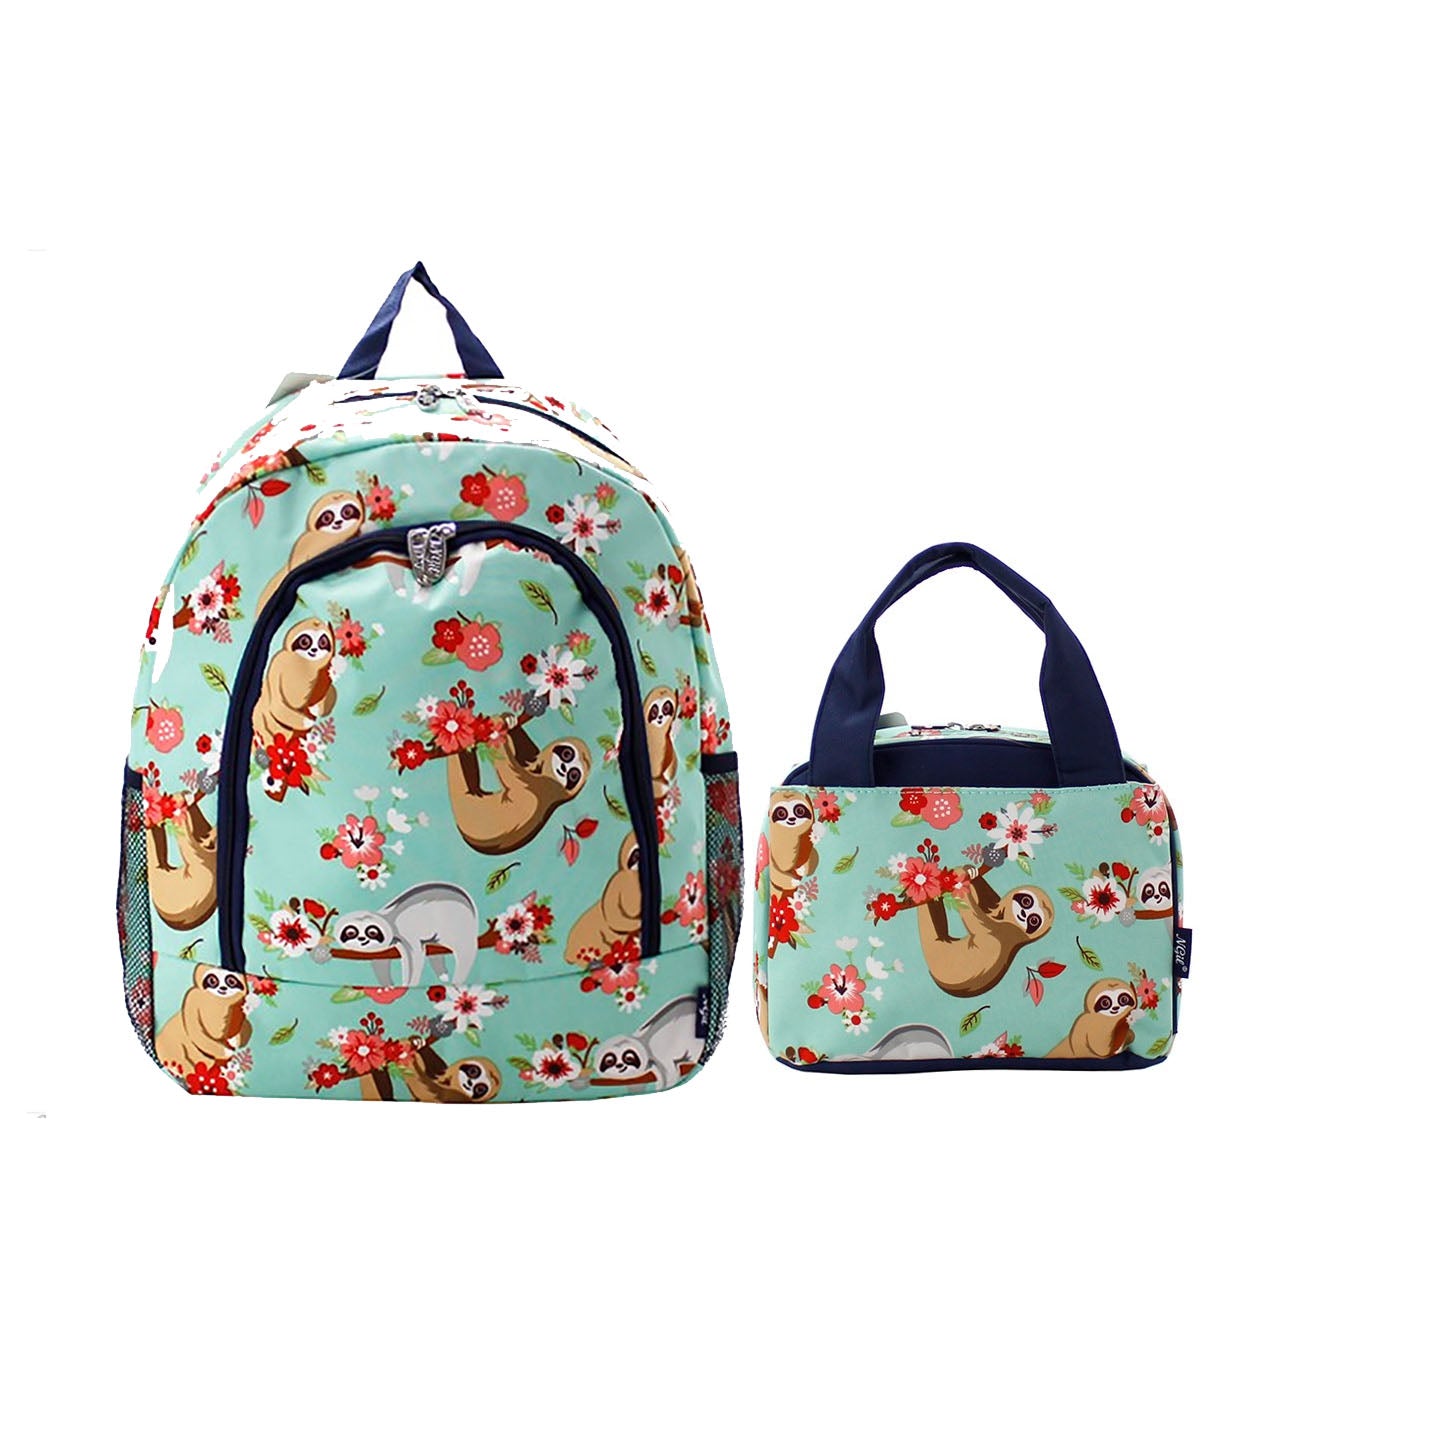 Sloth Backpack and lunch bag set